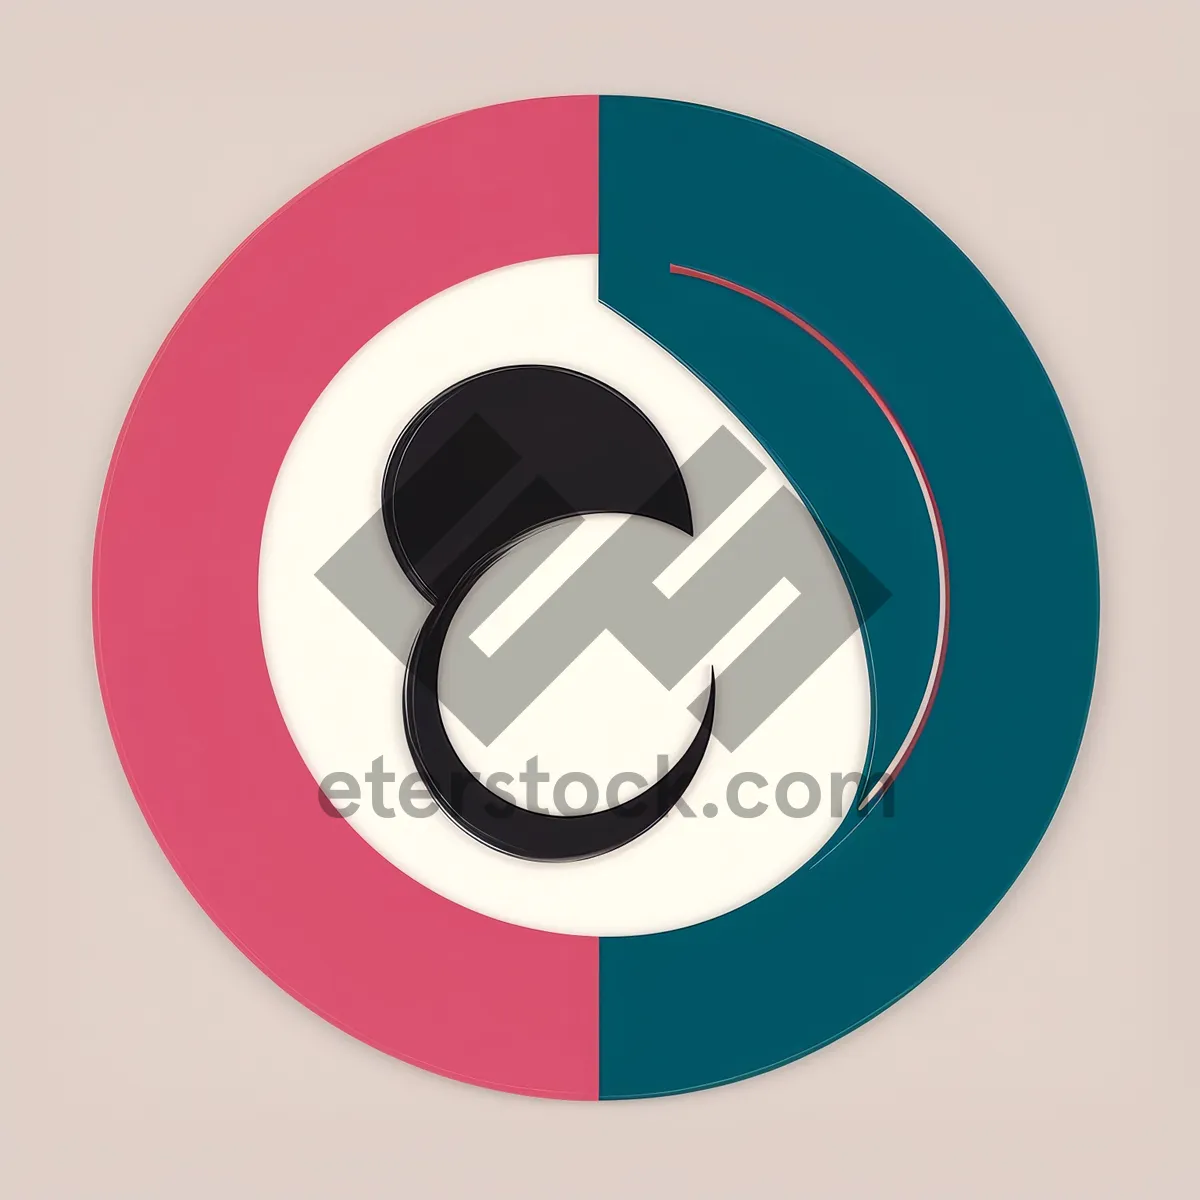 Picture of Web Design Icon: Circular 3D Button with Glossy Reflection